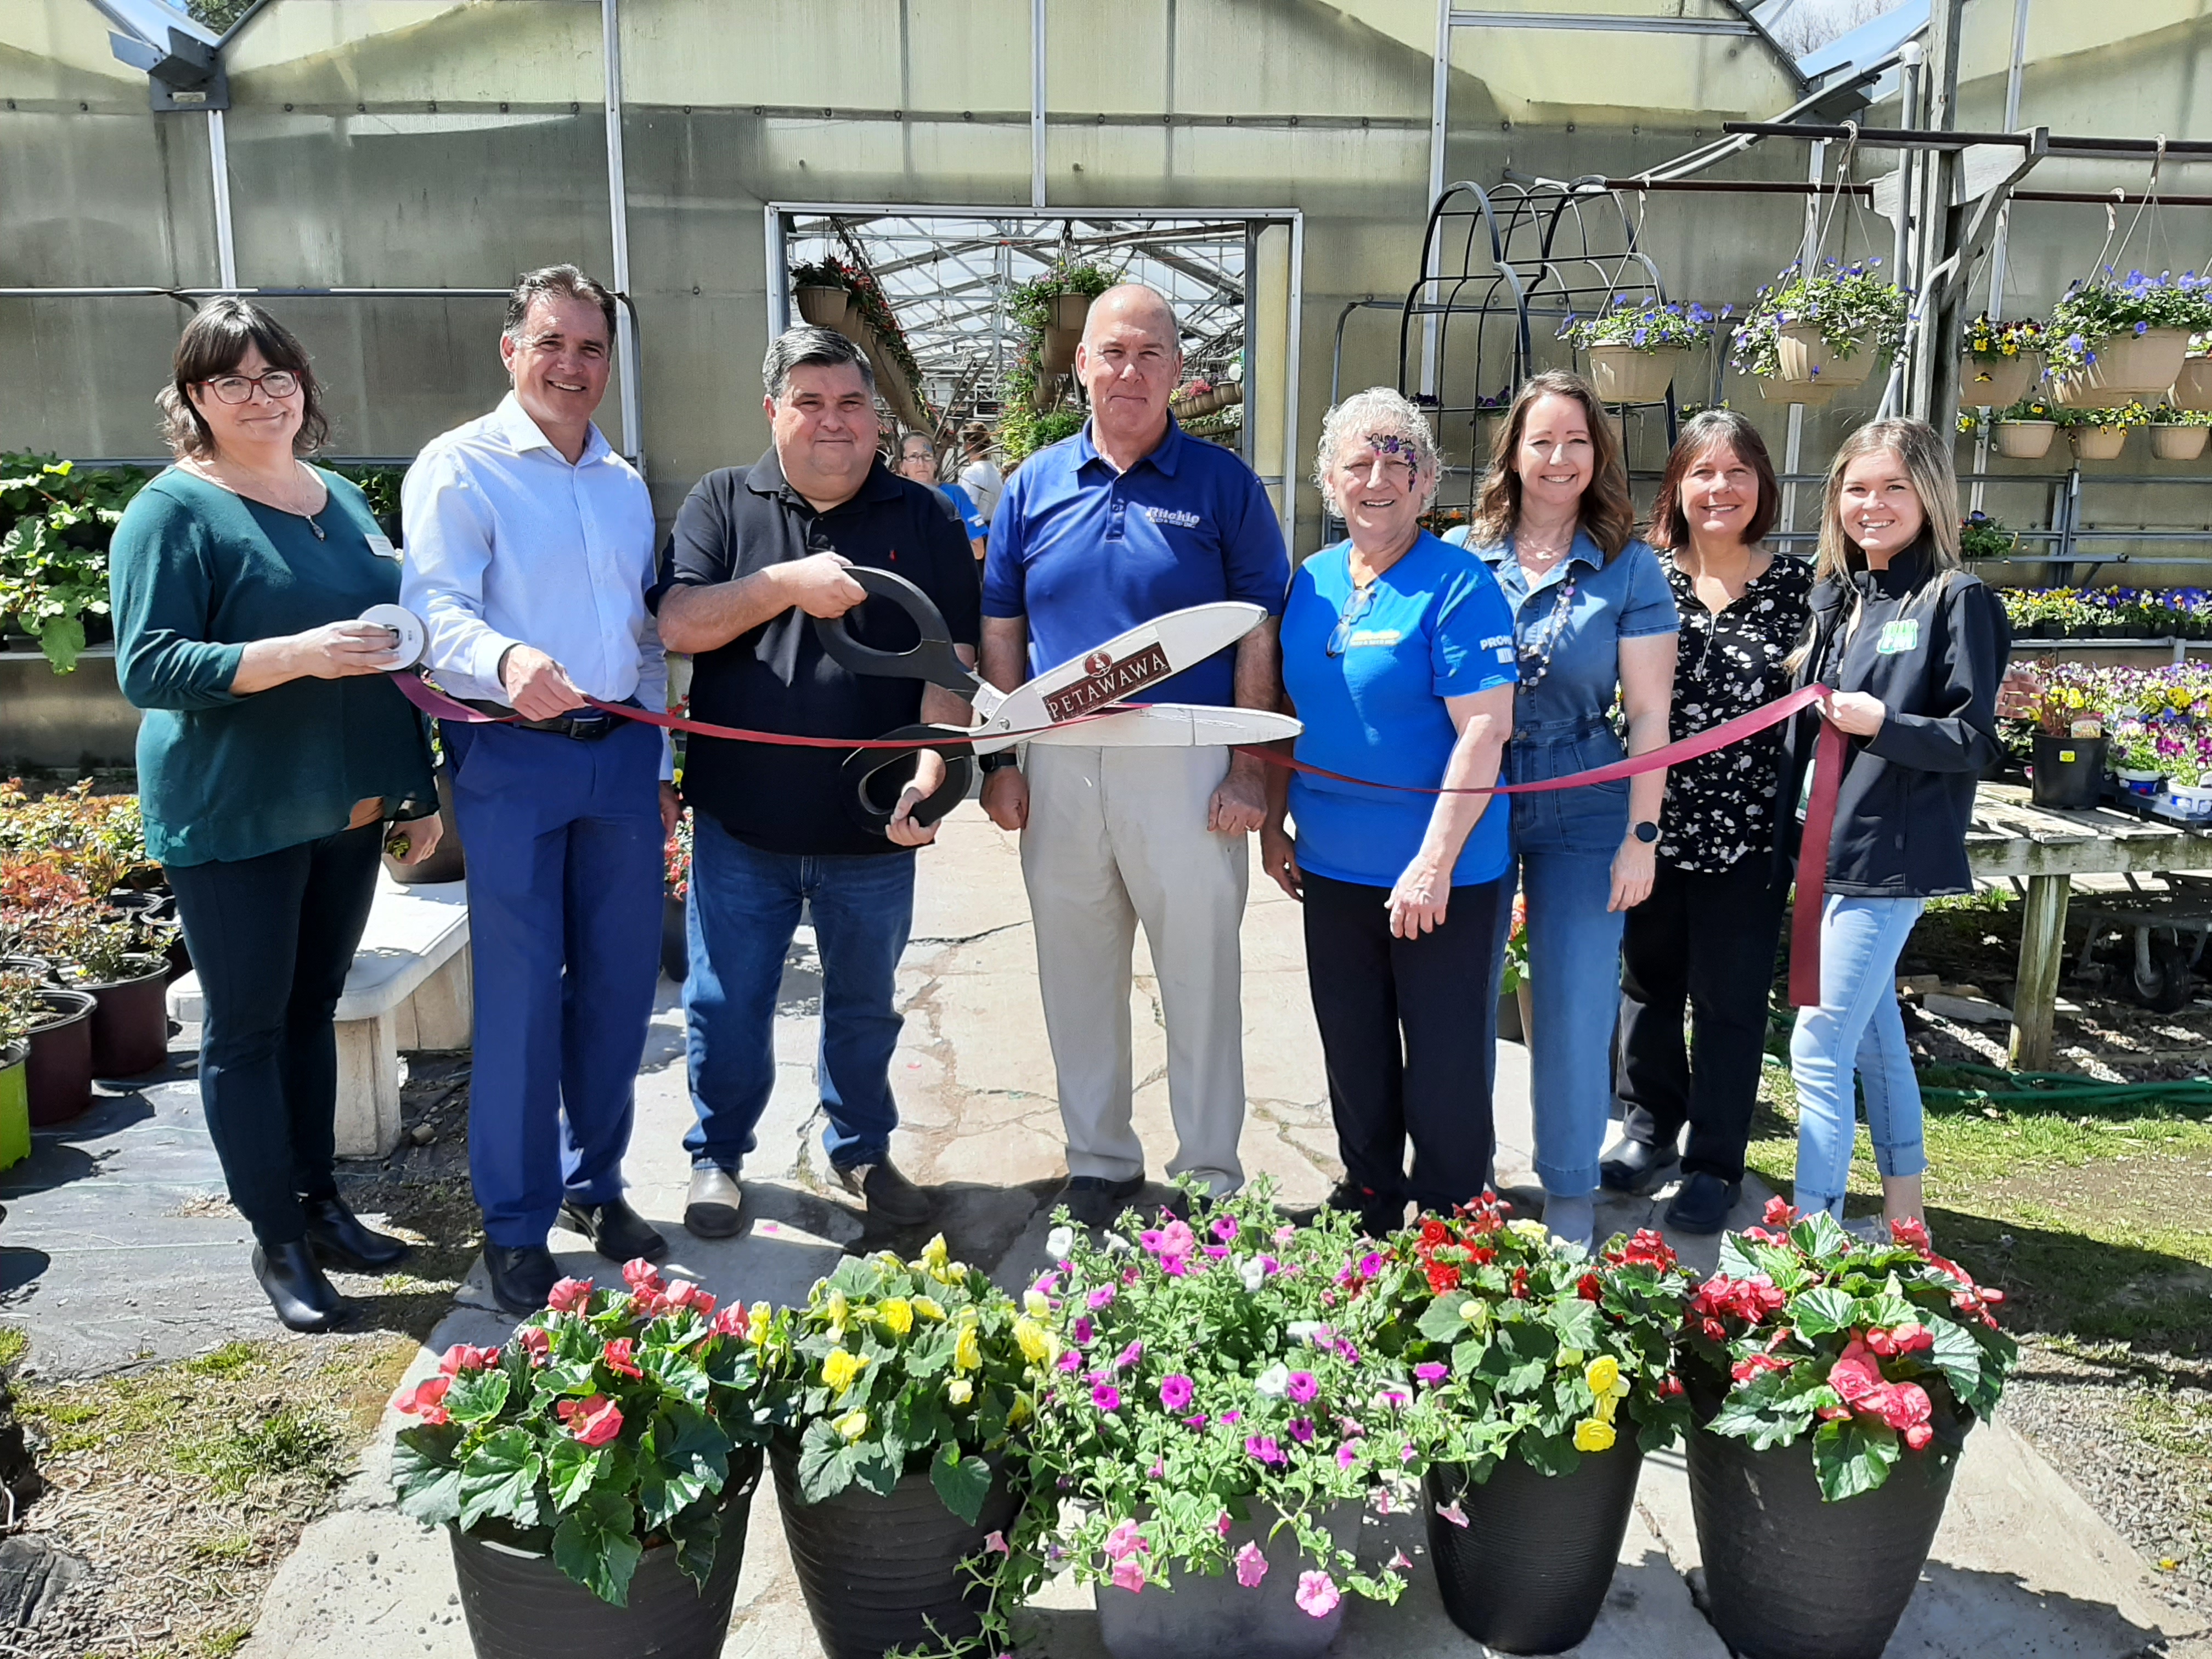 An image of the ribbon cutting ceremony at Richie Springhill Nursery